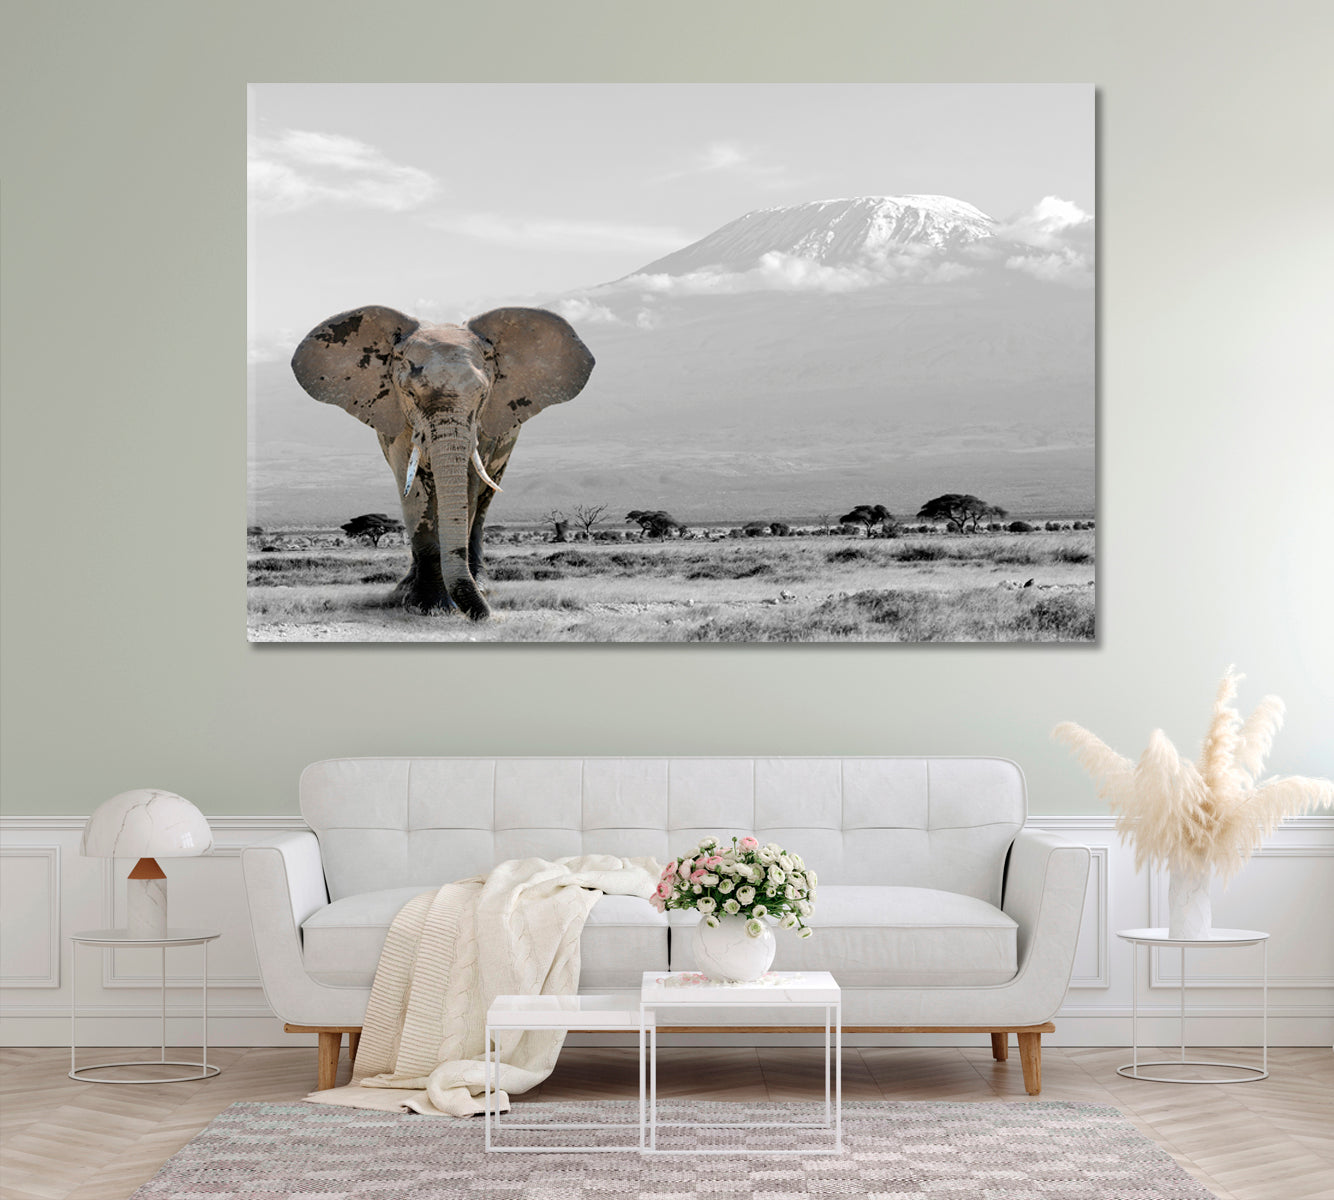 Elephant in Kenya National Park Canvas Print ArtLexy 1 Panel 24"x16" inches 